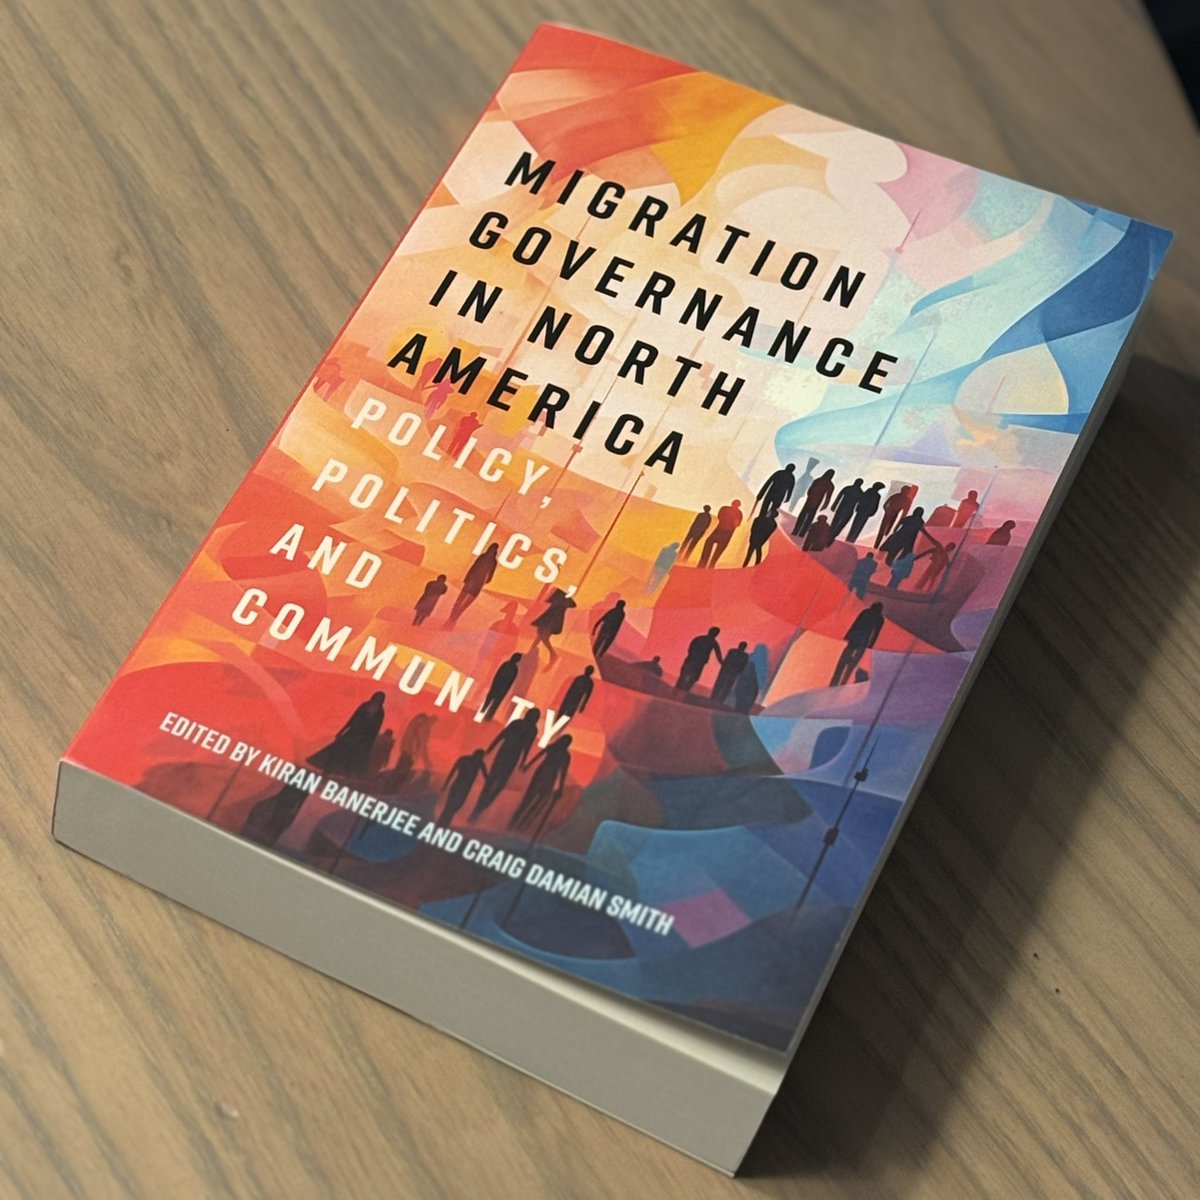 Just arrived in my mailbox: @KM_Banerjee and @CraigDamian’s new collection, Migration Governance in North America, to which @PhilTriadafilos and I contributed a chapter. Great to see it out! Published by @McGillQueensUP.